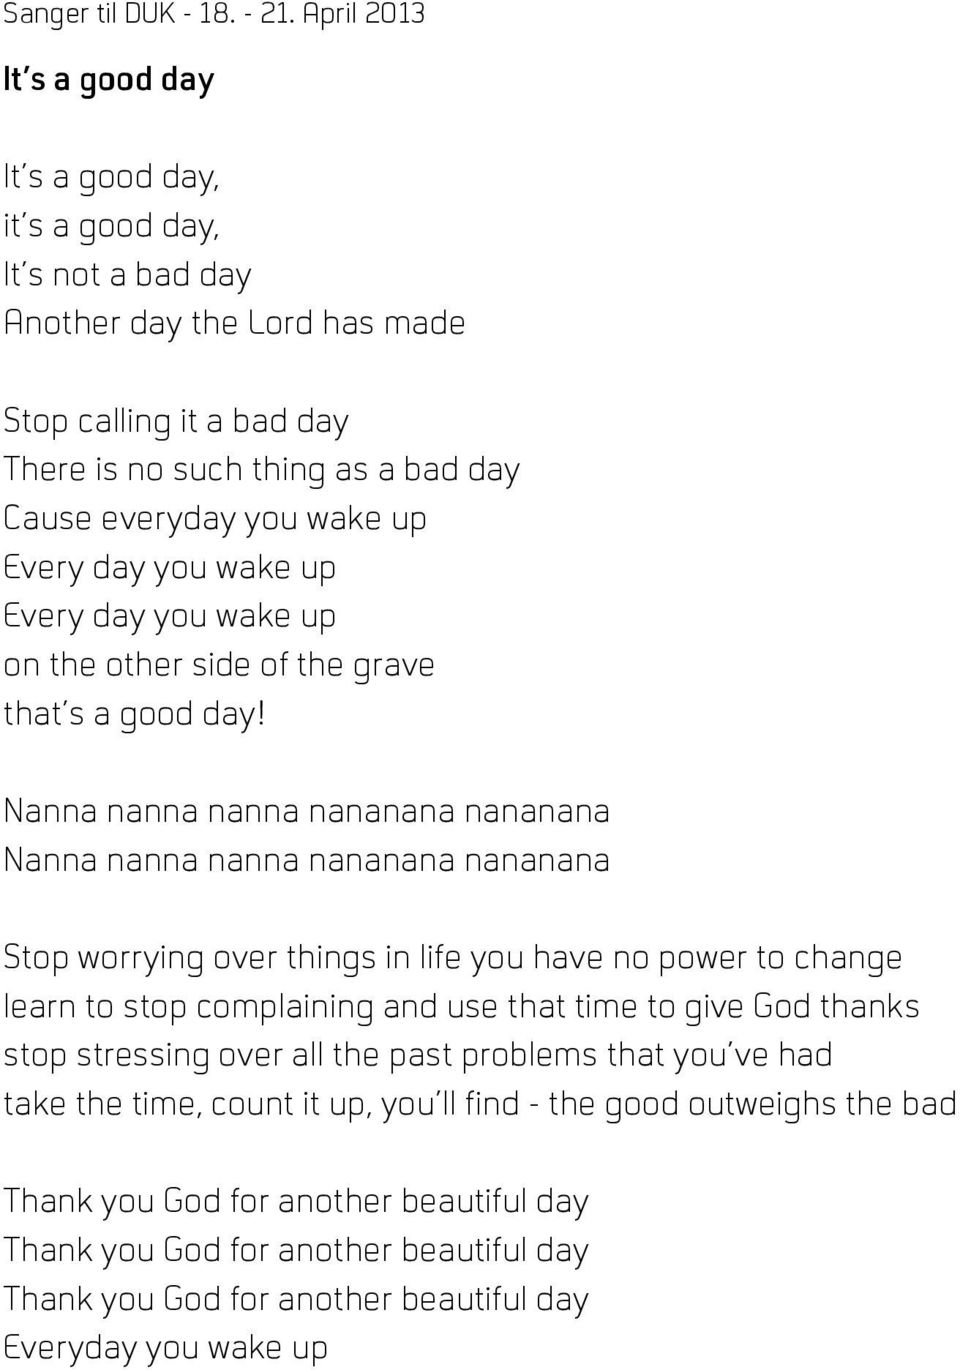 Nanna nanna nanna nananana nananana Nanna nanna nanna nananana nananana Stop worrying over things in life you have no power to change learn to stop complaining and use that time to give